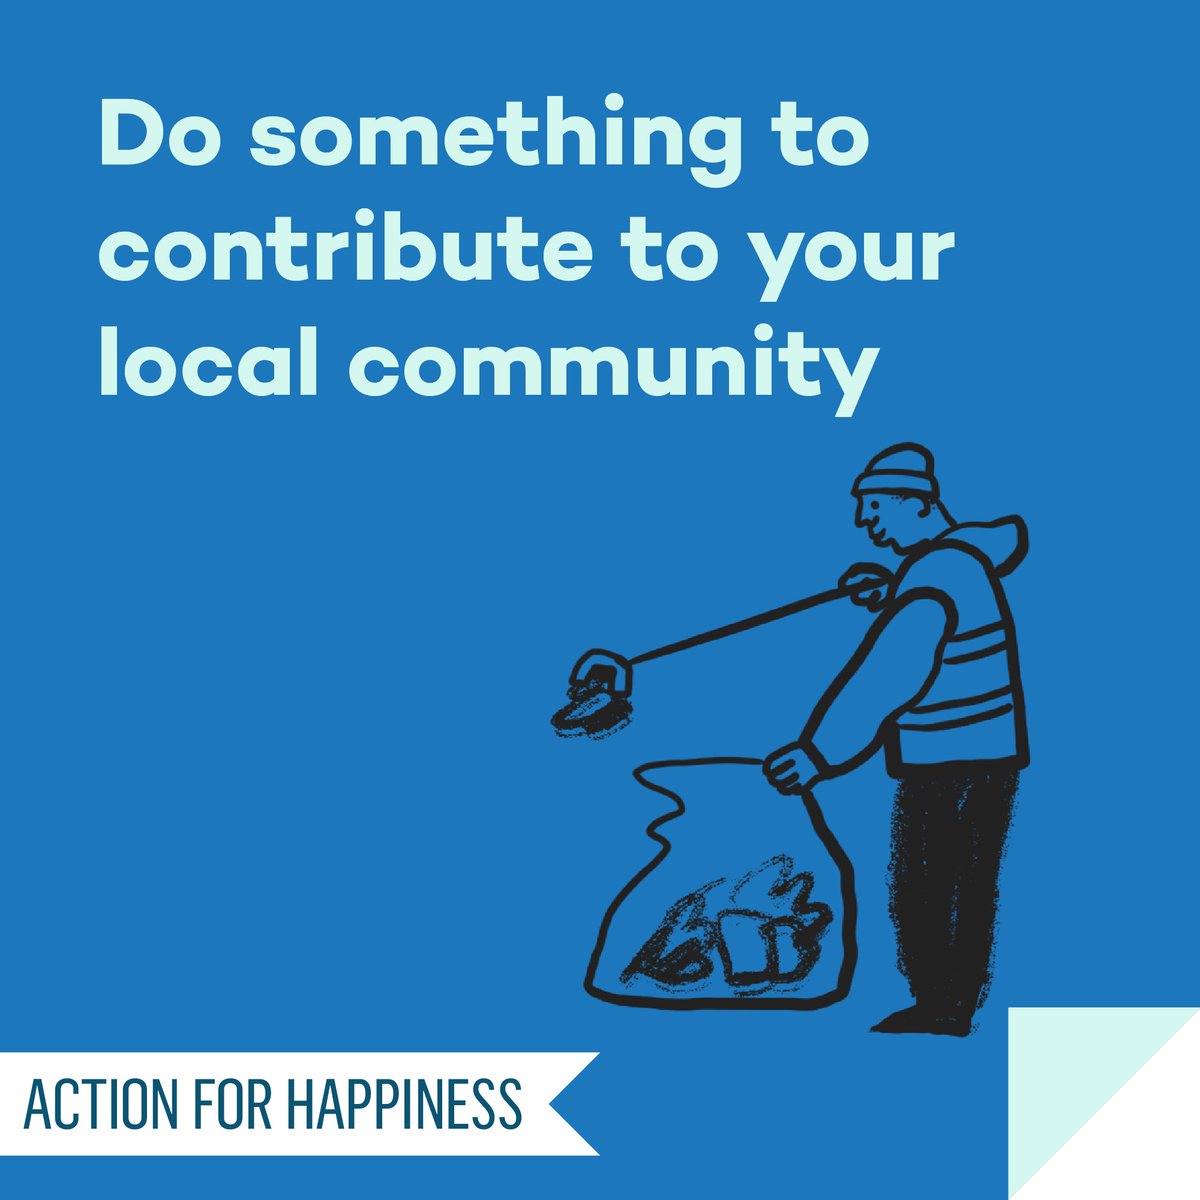 Meaningful May - Day 15: Do something to contribute to your local community actionforhappiness.org/meaningful-may #MeaningfulMay